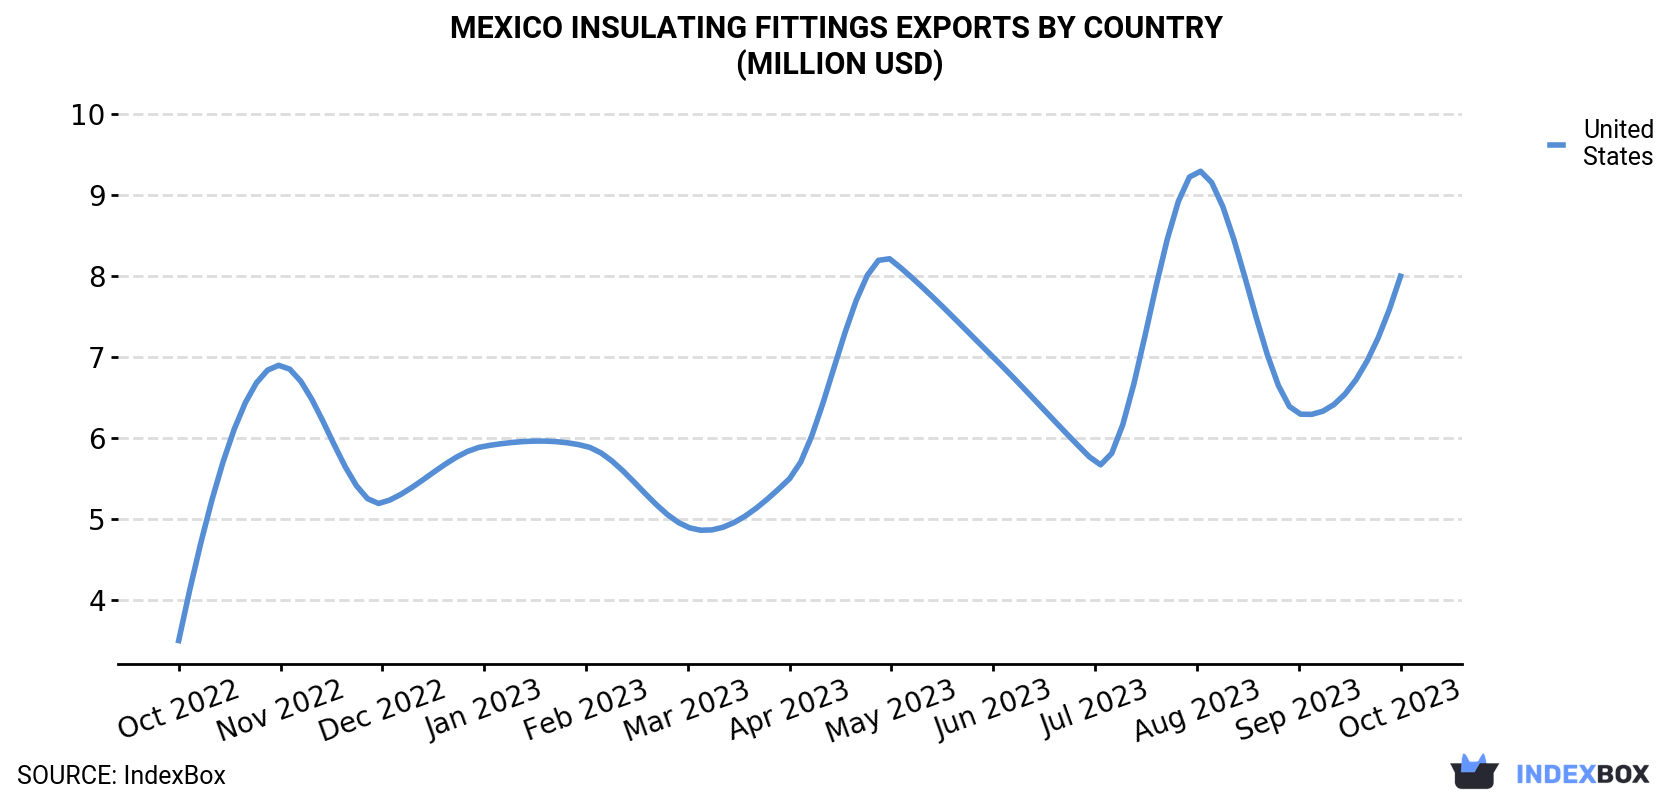 Mexico Insulating Fittings Exports By Country (Million USD)